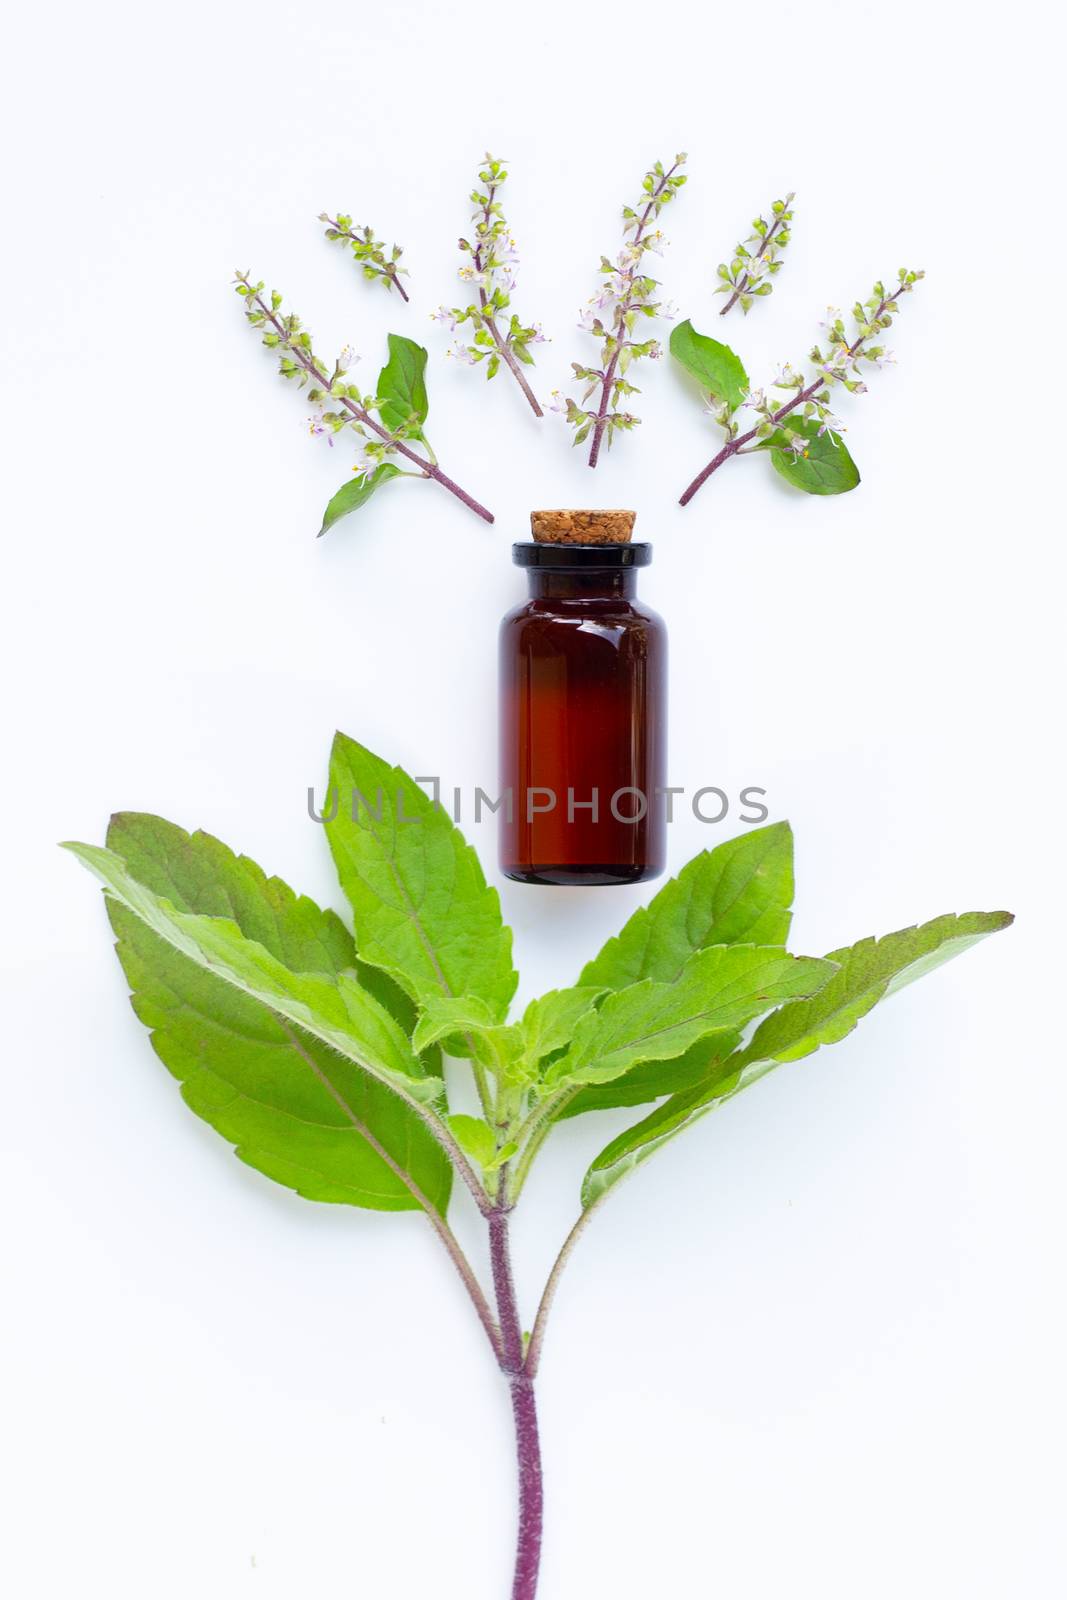 Holy basil essential oil with holy basil leaves and flower on wh by Bowonpat